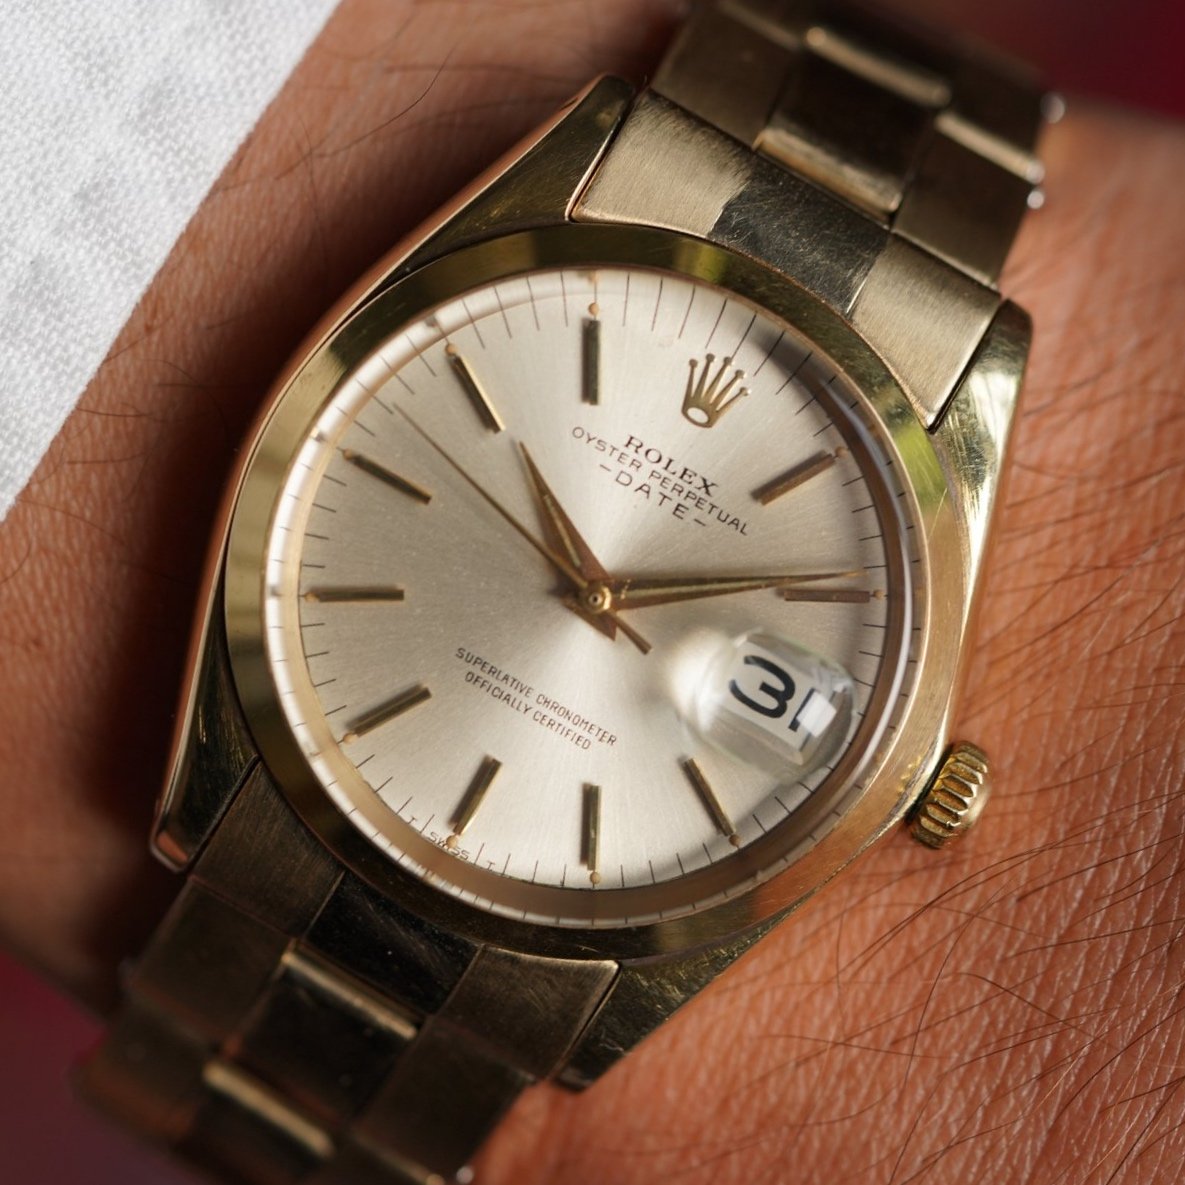 Rolex Date Reference 1500 in 14K Gold